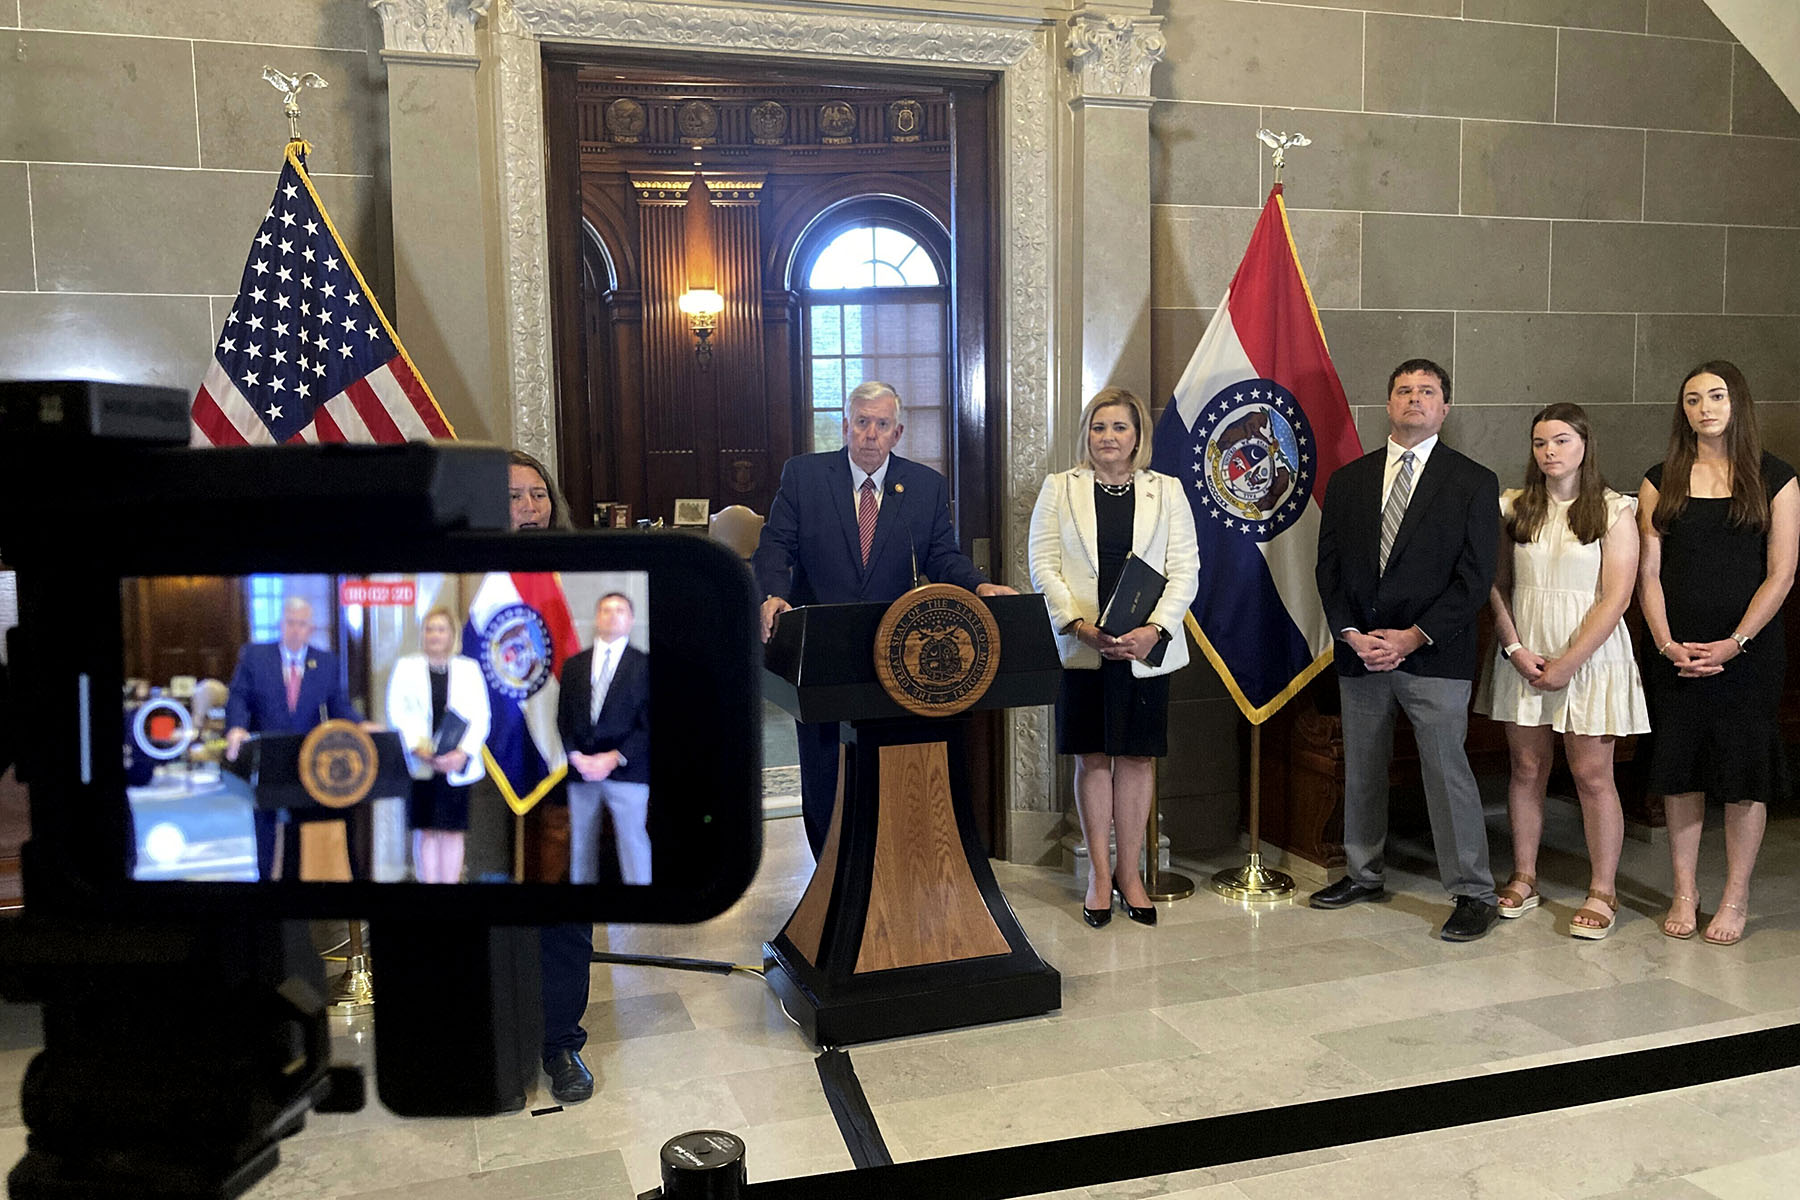 Missouri Gov. Mike Parson introduces Judge Kelly Broniec as the next judge on the Missouri Supreme court during a press conference.